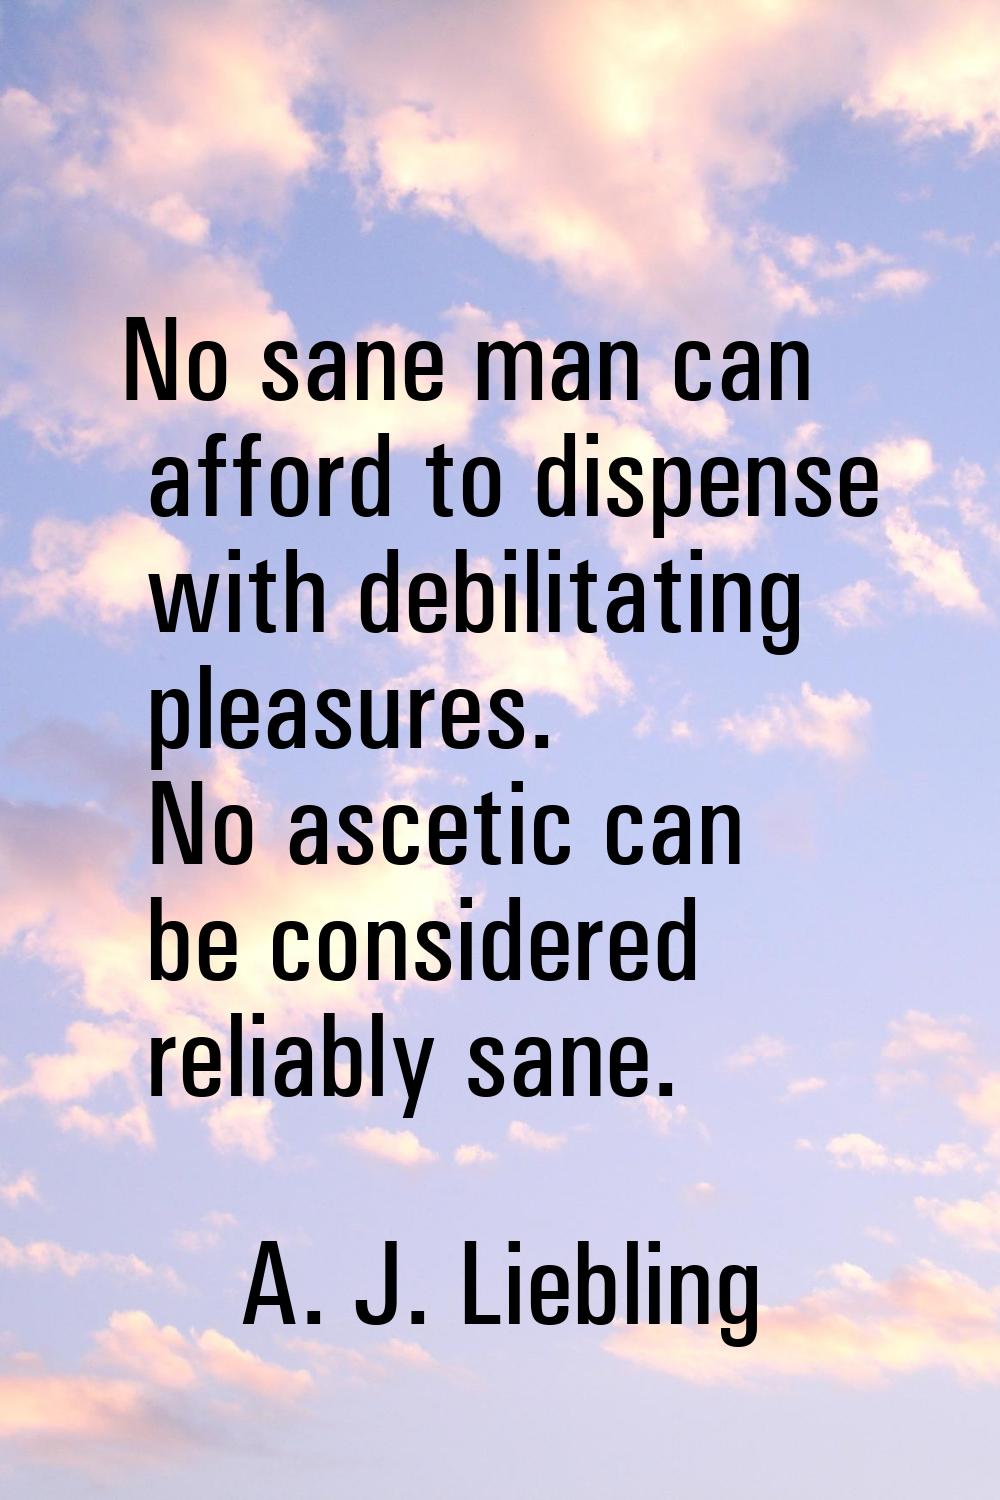 No sane man can afford to dispense with debilitating pleasures. No ascetic can be considered reliab